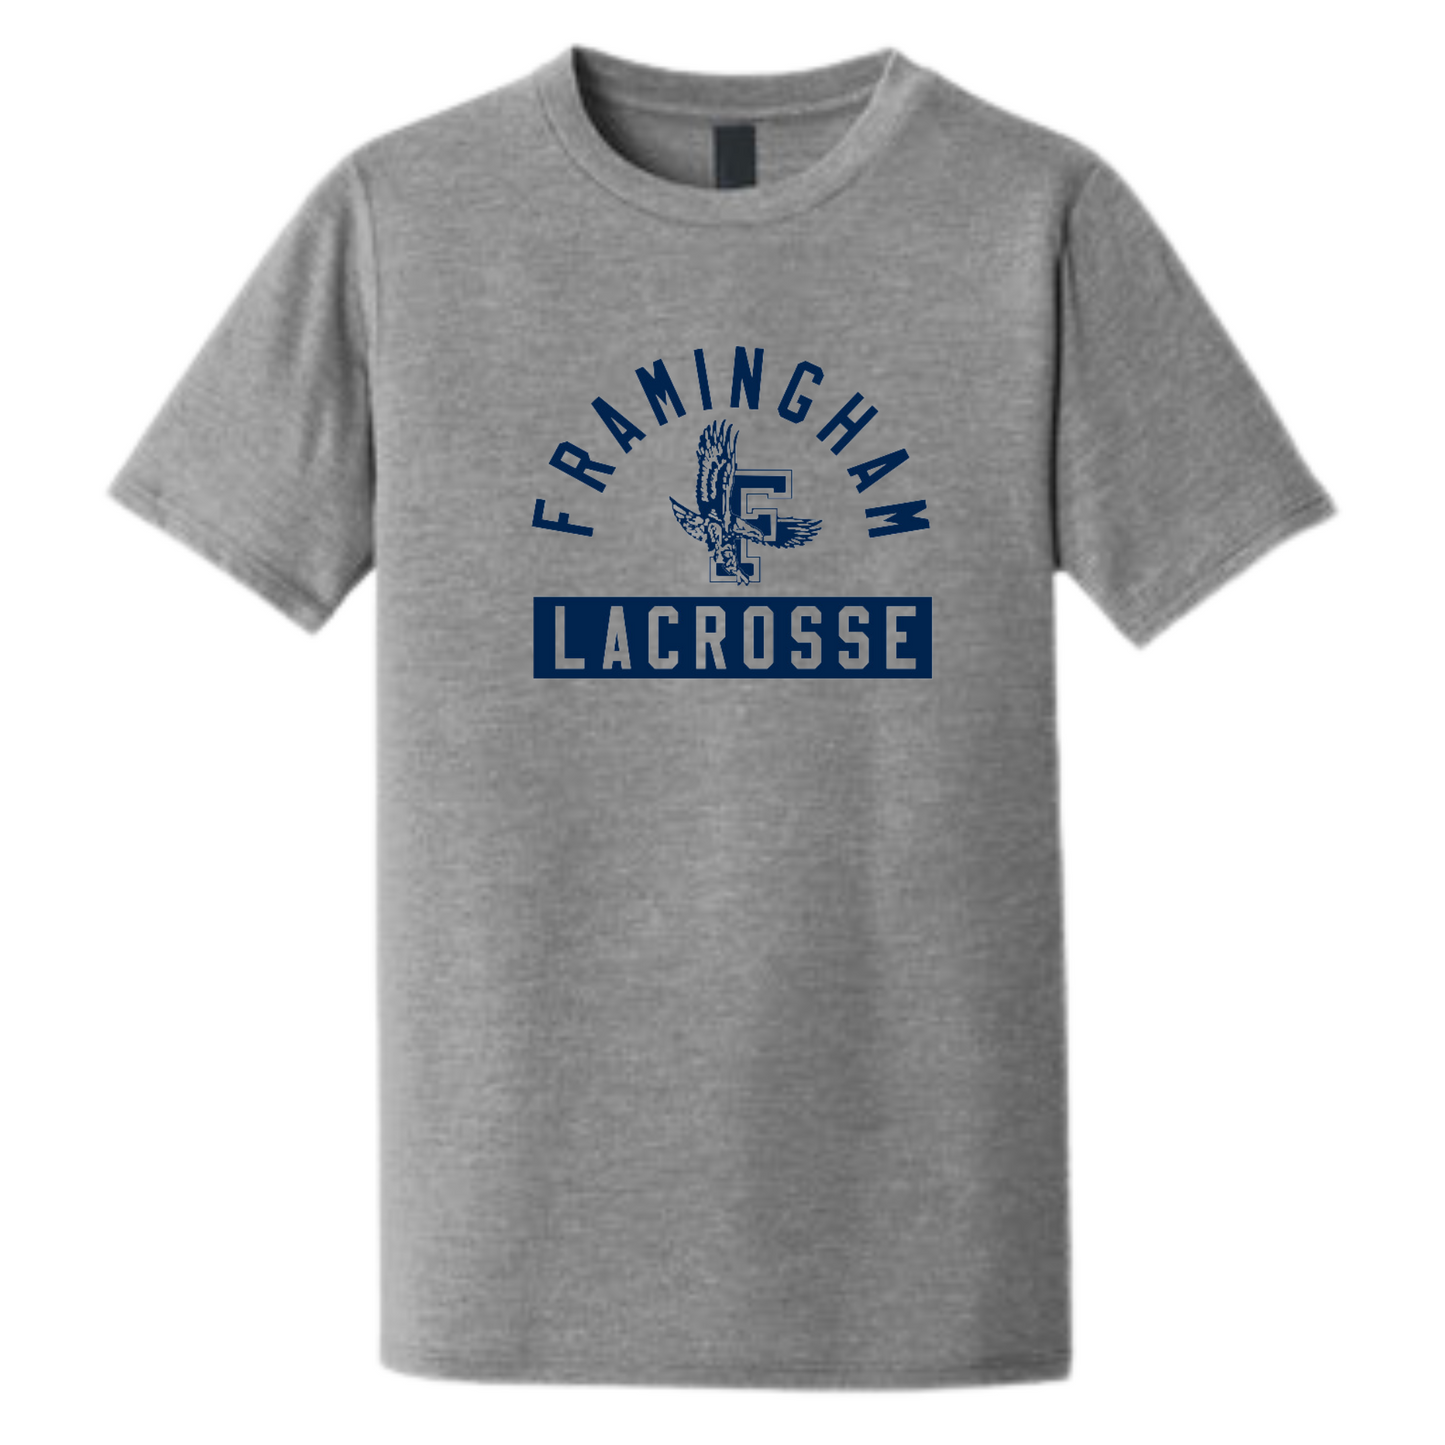 FRAMINGHAM YOUTH LACROSSE YOUTH TEE - GRAY